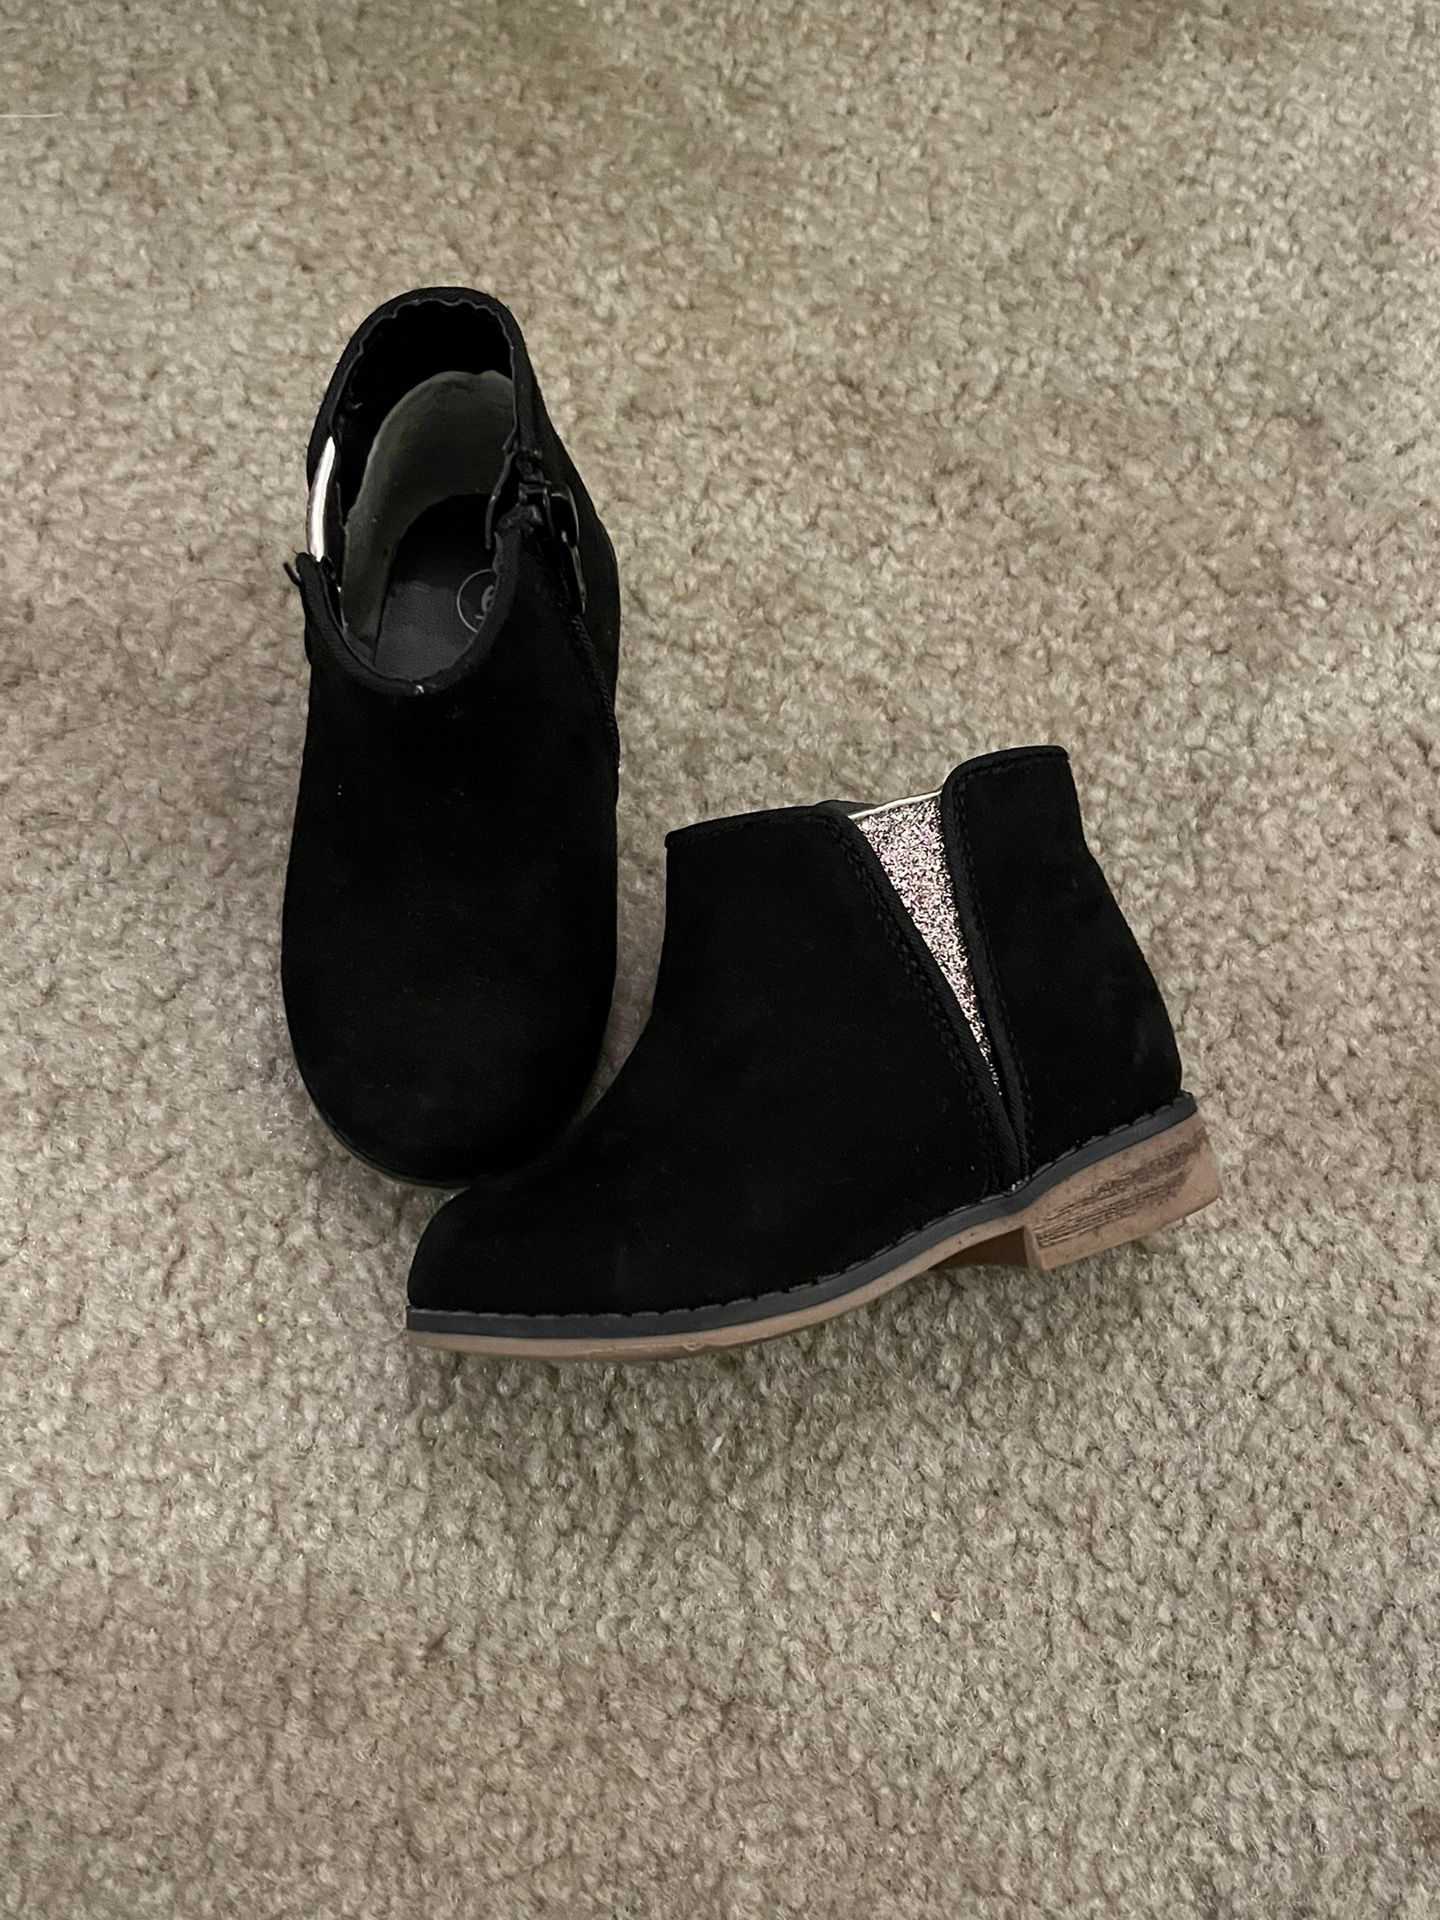 Girl Black Ankle Bootie